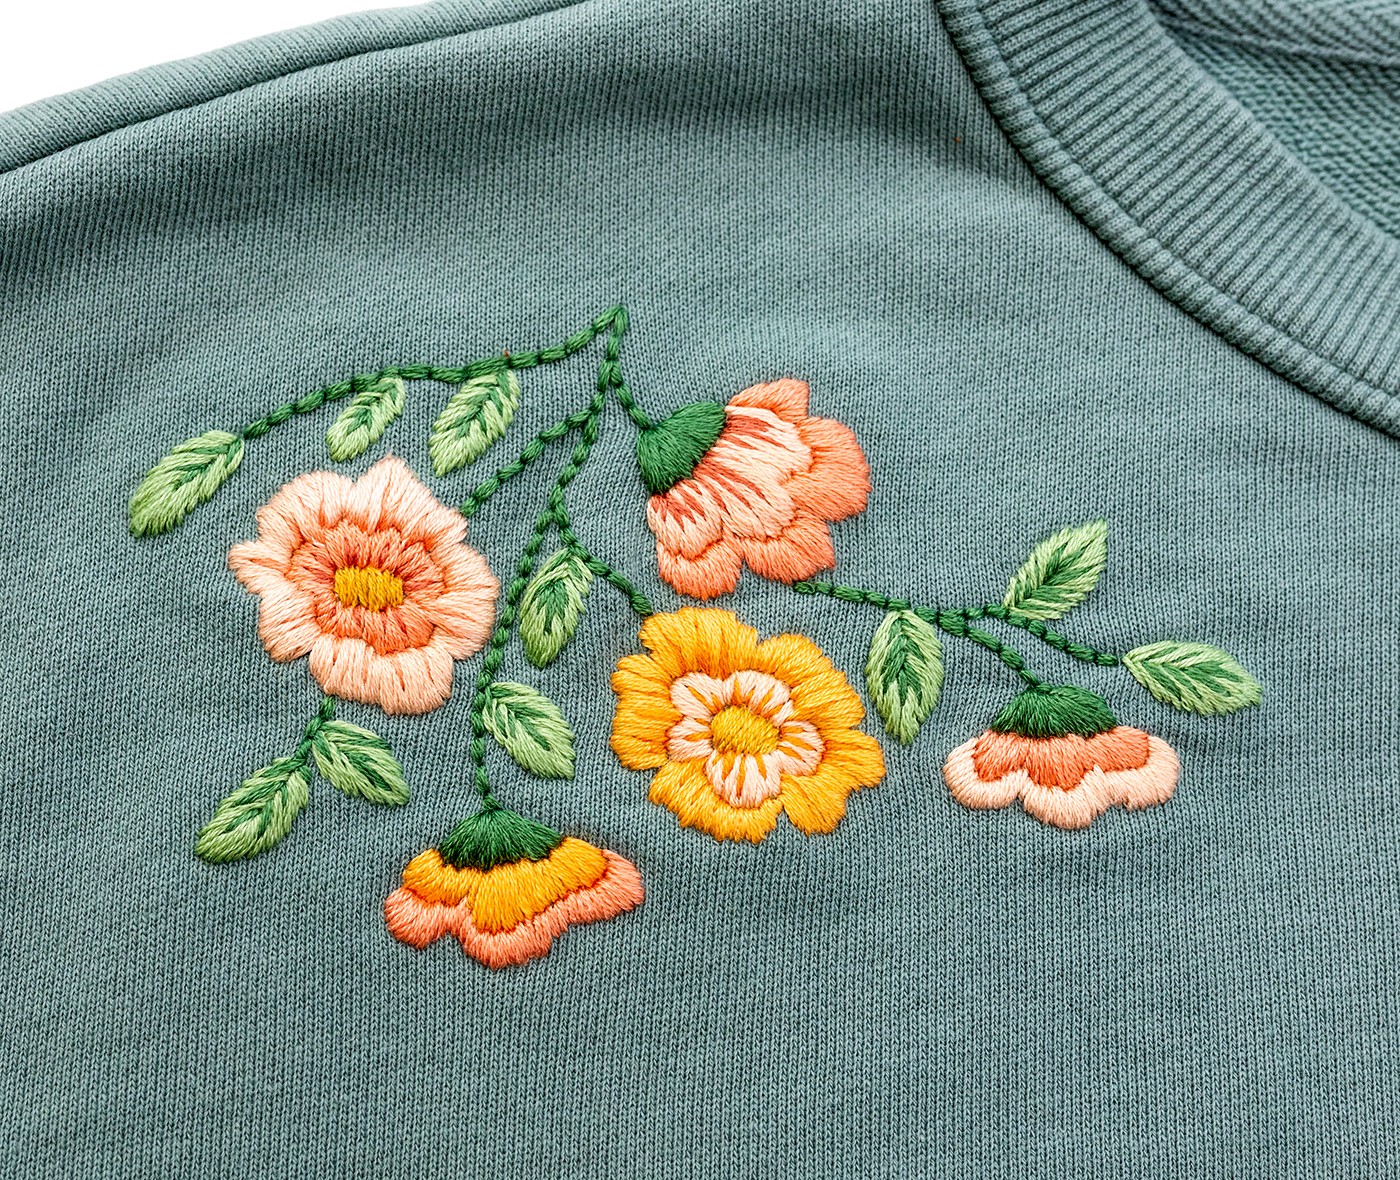 A floral design is stitched on fabric.